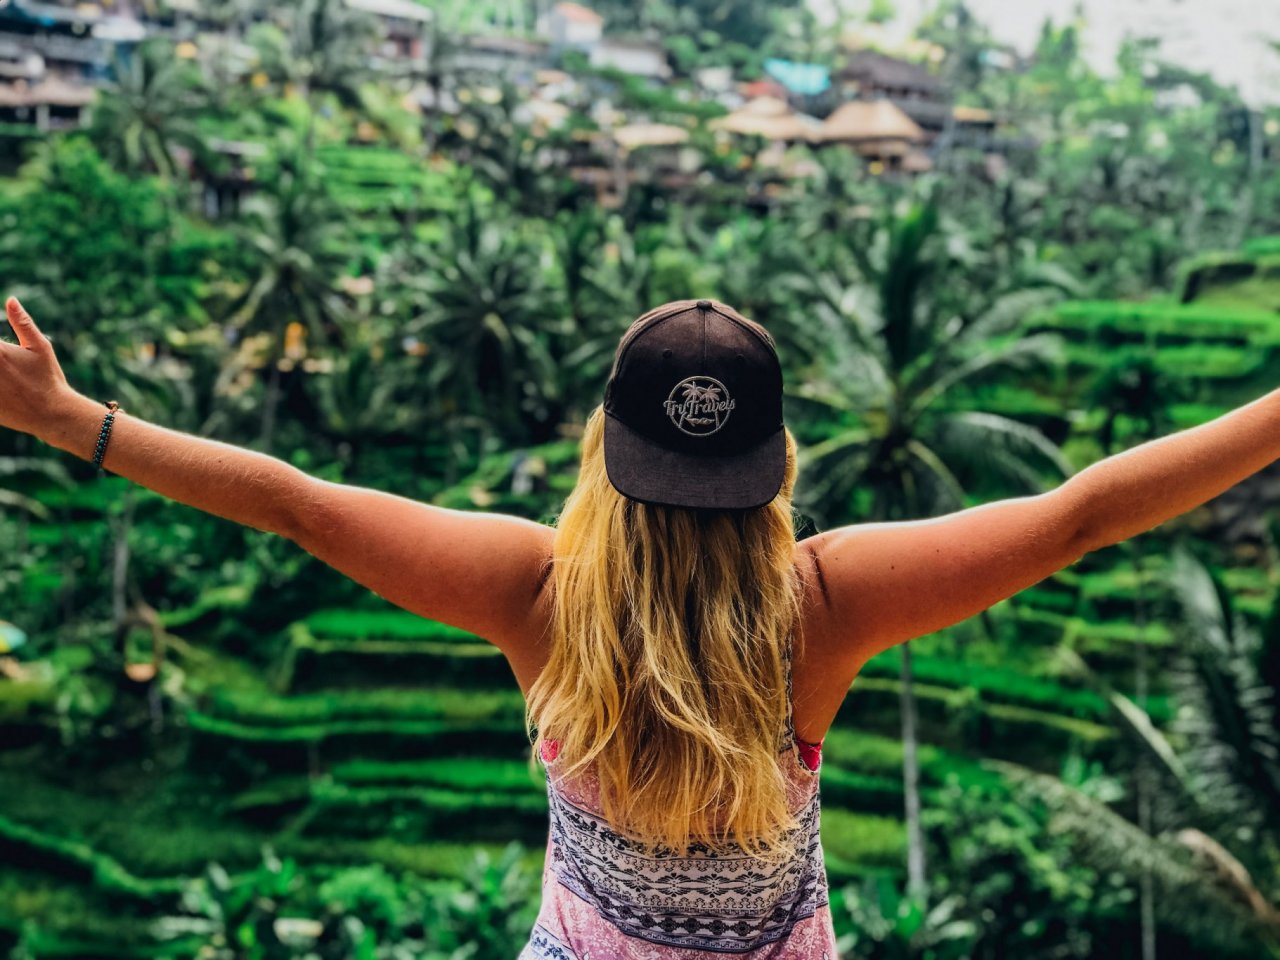 A girl posing with her arms out admiring the view of the emerald green rice terraces in Ubud, Bali, Indonesia